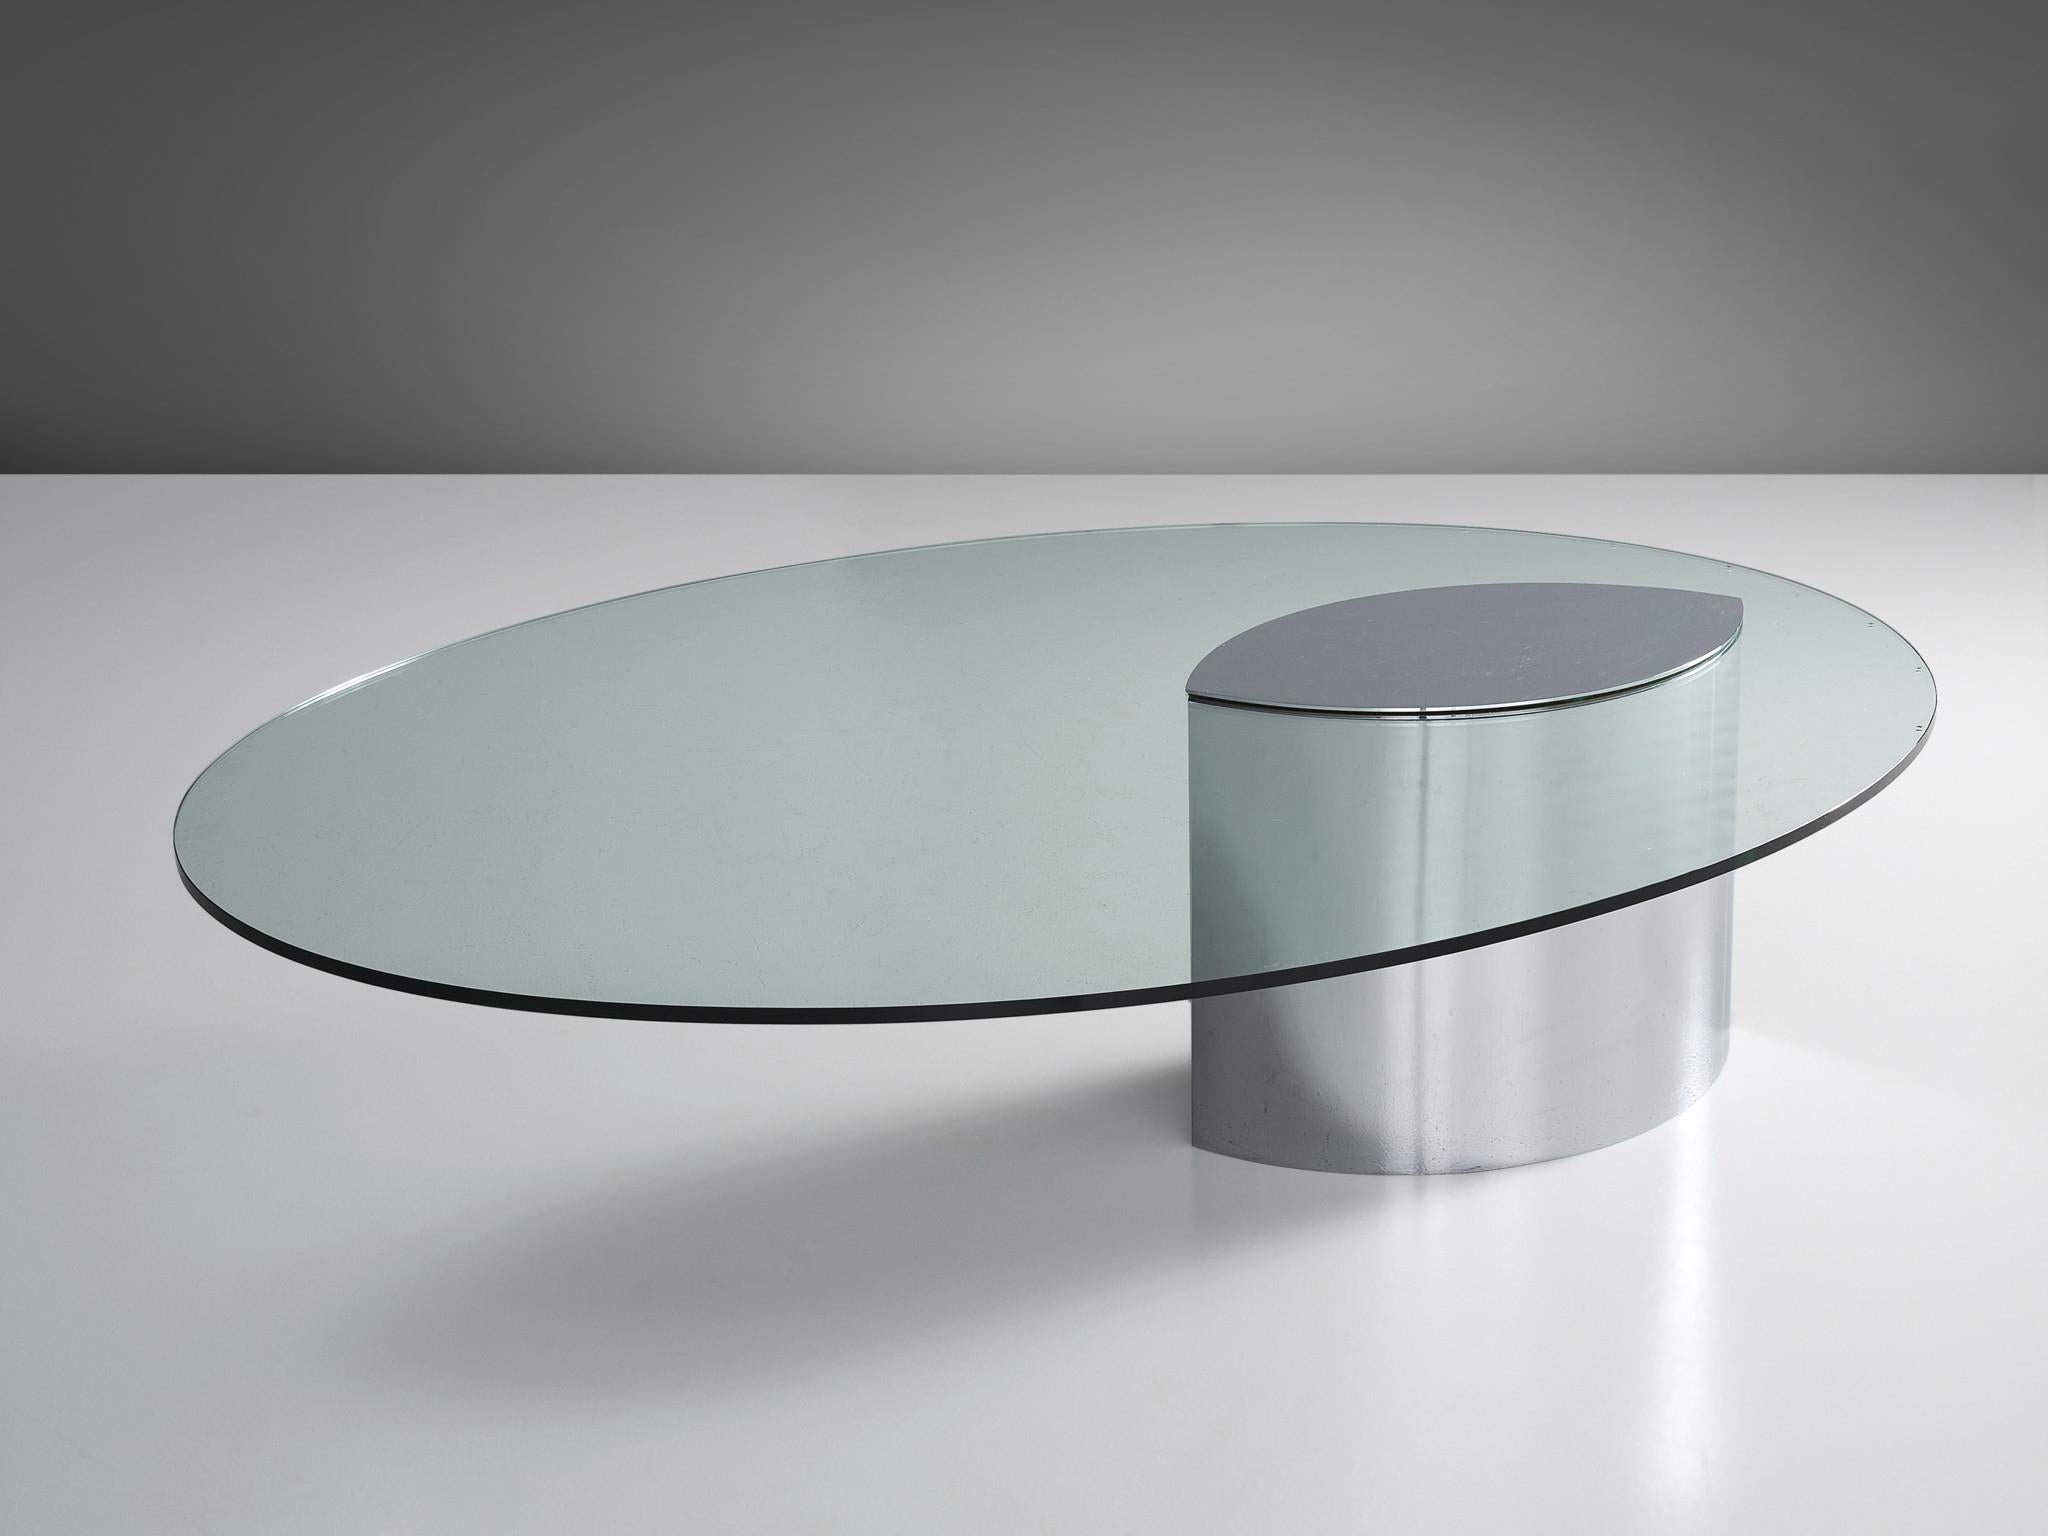 Cini Boeri for Gavina, coffee table model 'Lunario', polished stainless steel, glass, Italy, 1971.

This early example of the Lunario coffee table is designed by Cini Boeri and made by the original manufacturer Gavina. The top is executed in clear